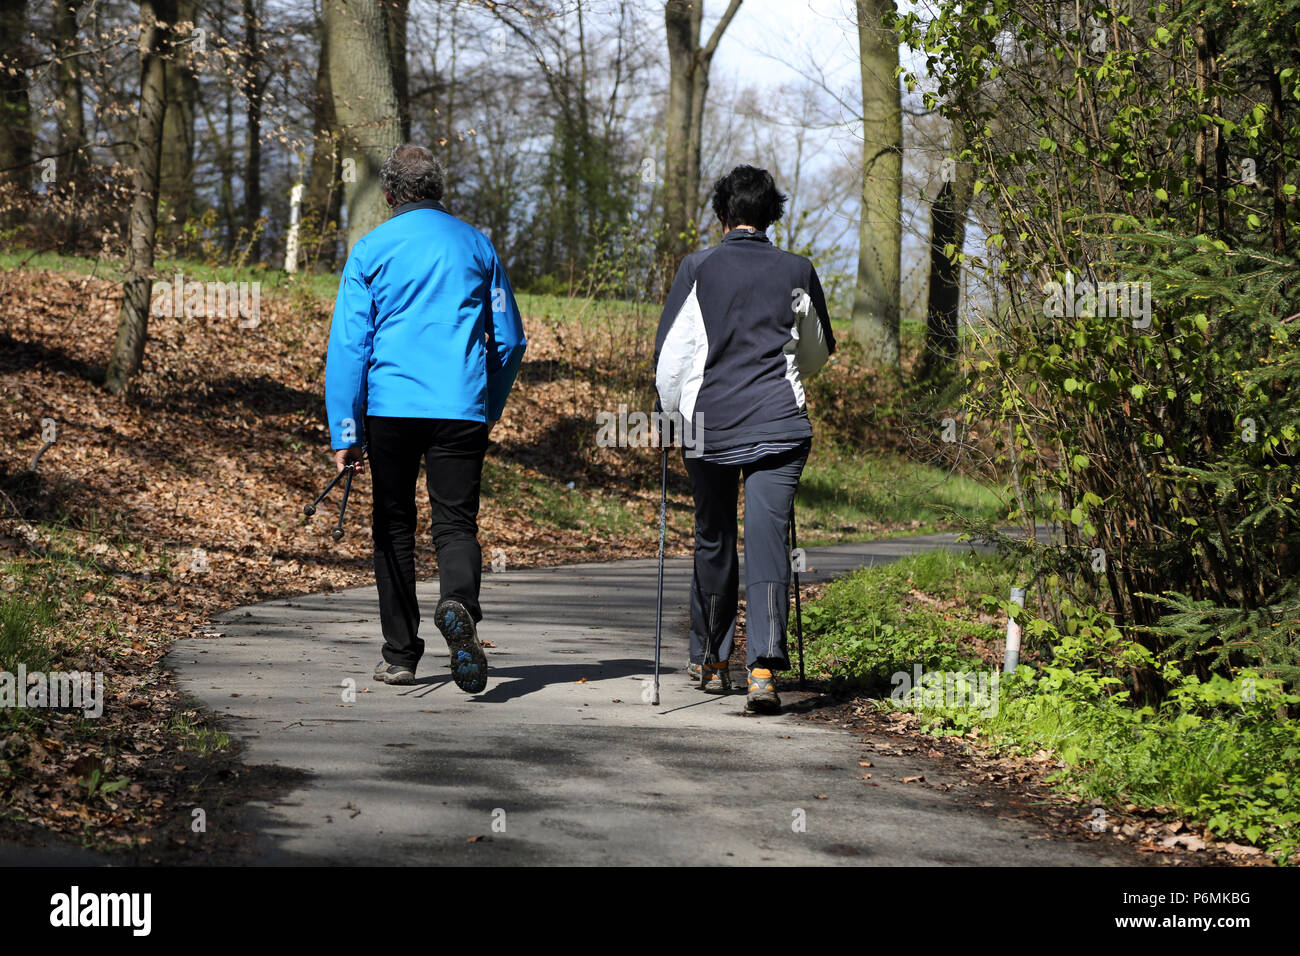 Melbeck, Germany - Man and Woman on Nordic Walking Stock Photo